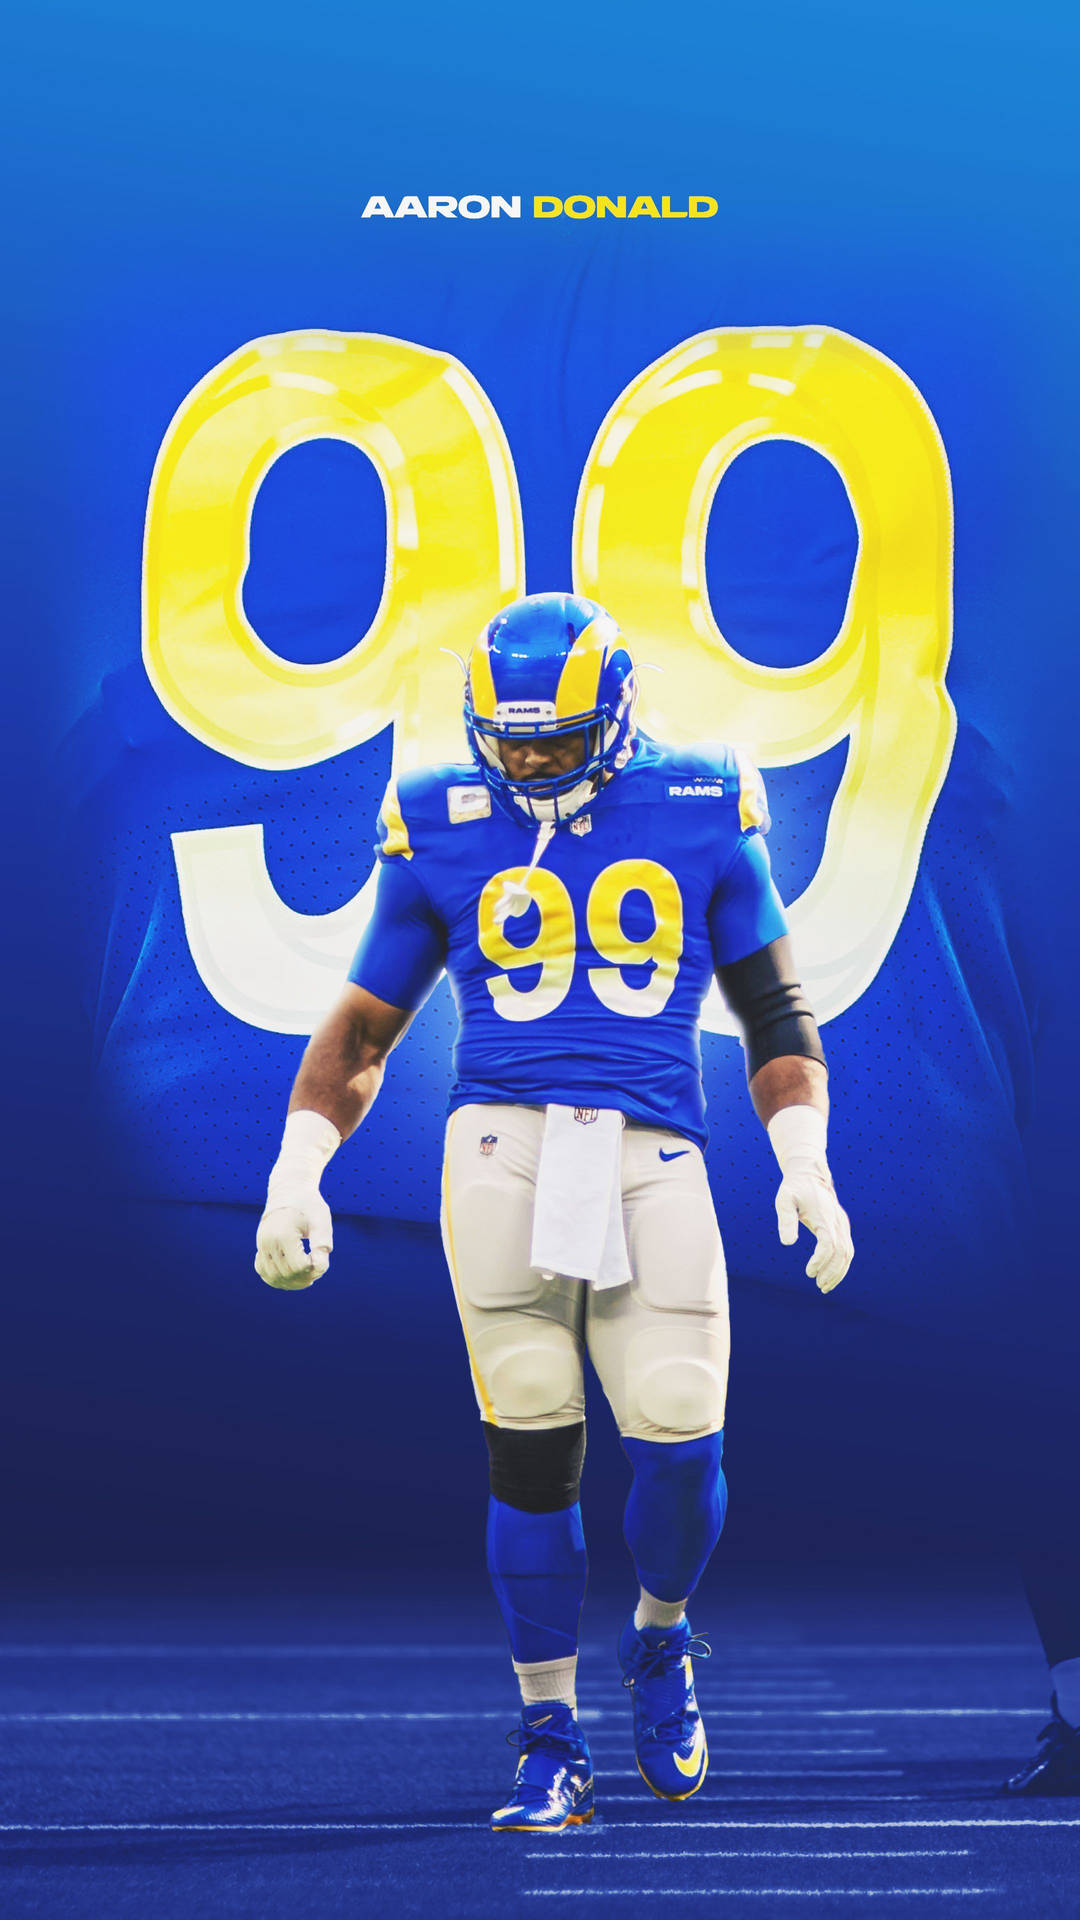 Los Angeles Rams Aaron Donald Jersey Number 99. Background